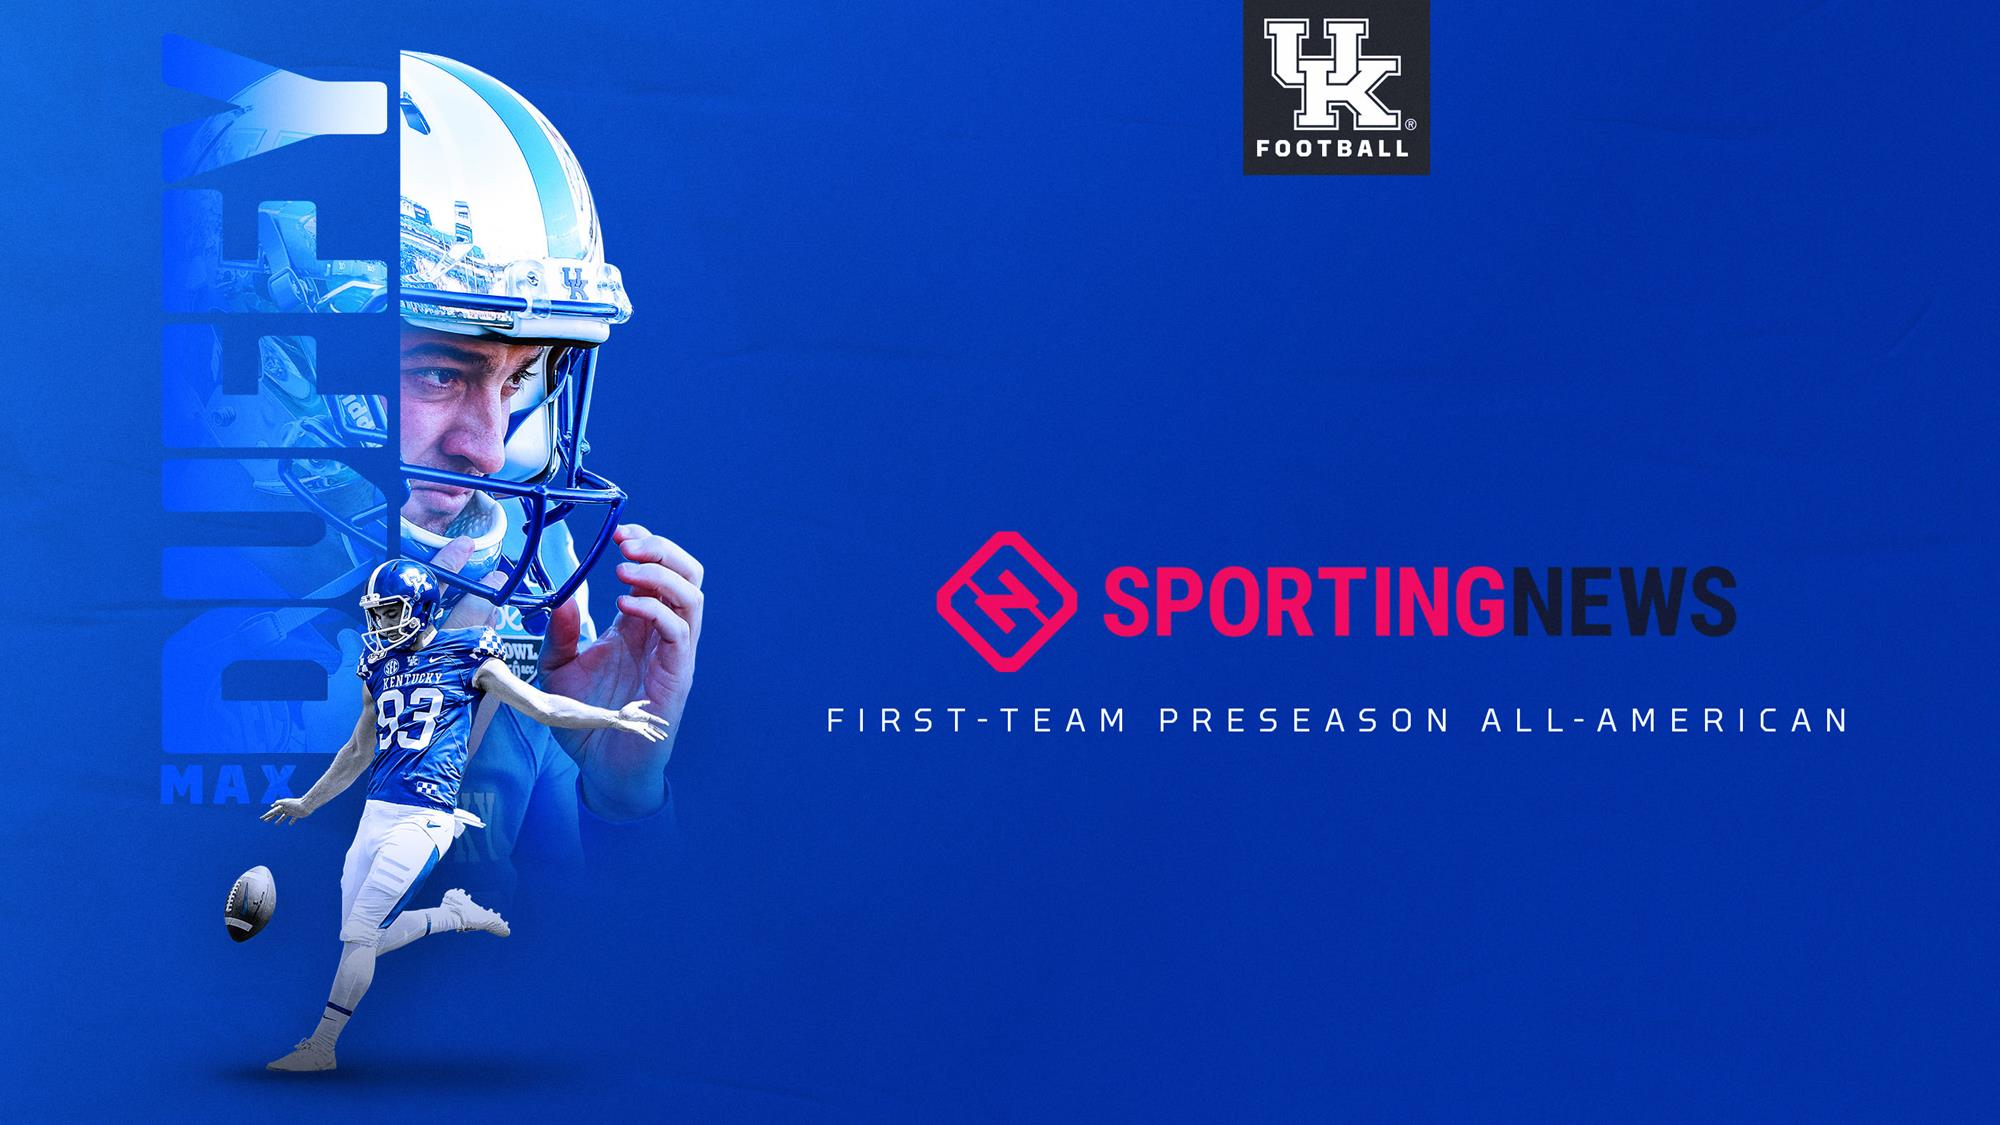 Max Duffy Named First-Team Preseason All-American by Sporting News